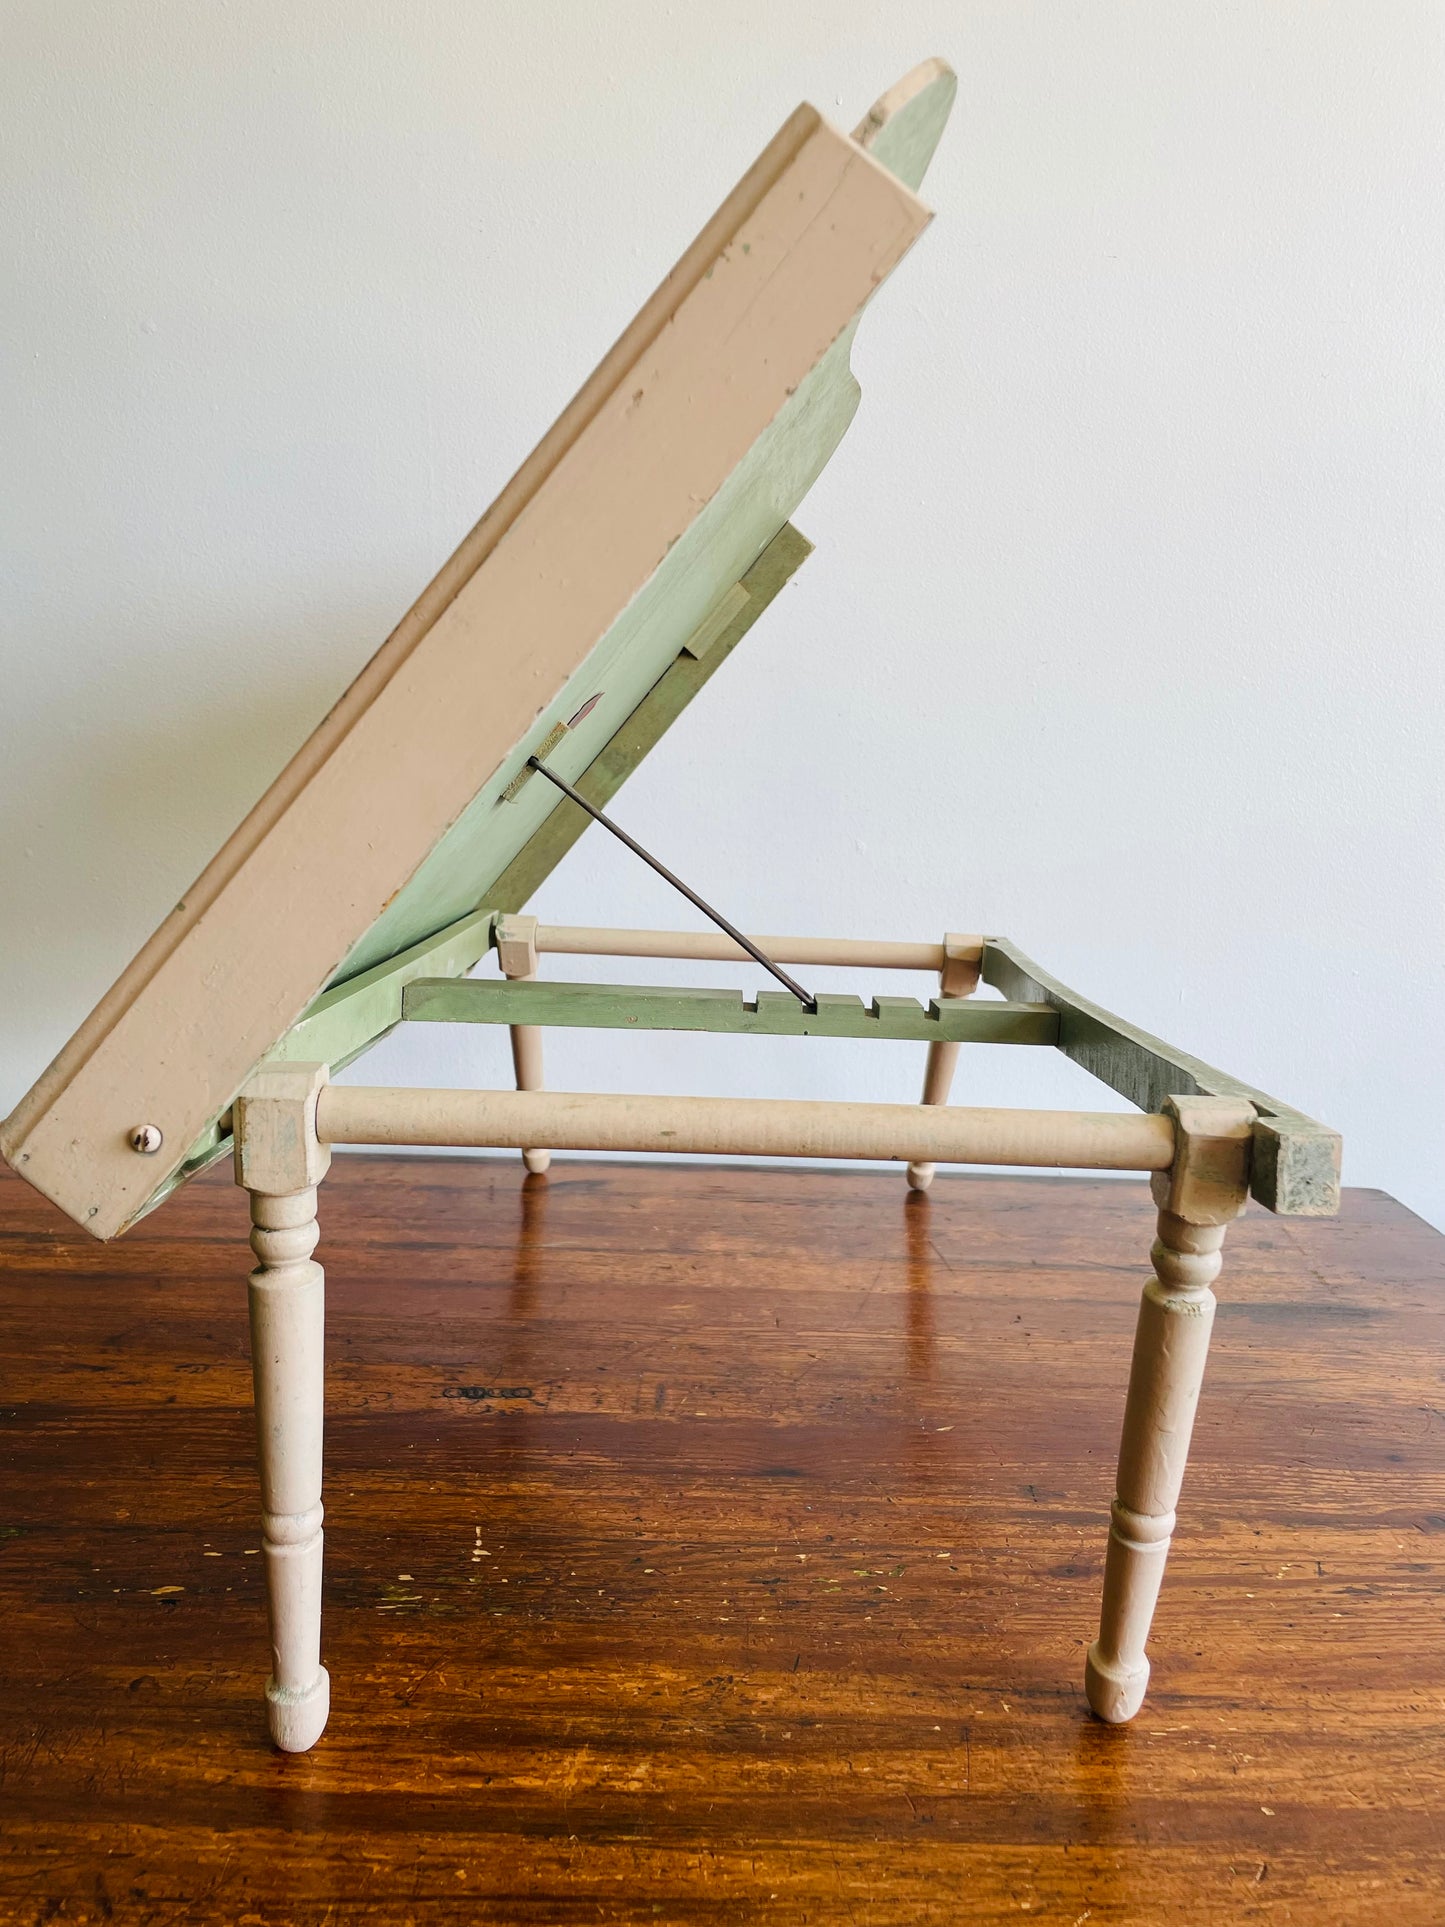 1940s General Wood Products Company The Golden Rule Line Folding Lap Desk or Easel Tray with 5 Adjustable Settings - Made in Cedarburg Wisconsin